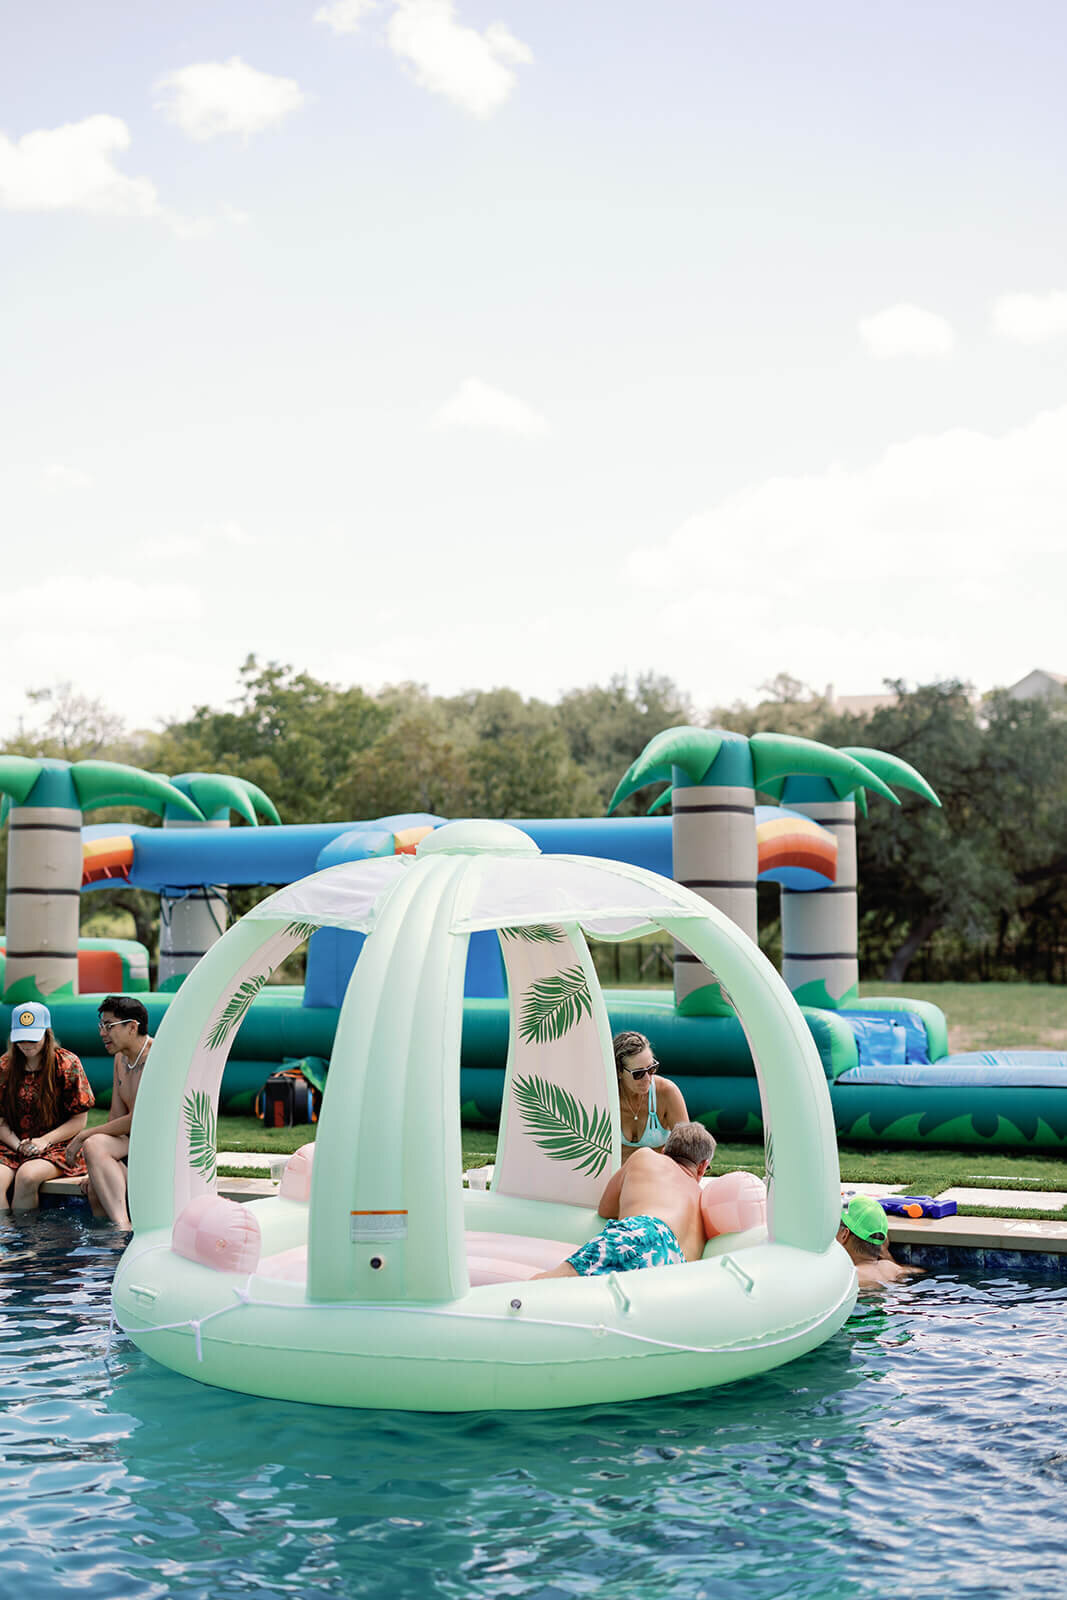 post-wedding-pool-party-austin-julie-wilhite-photography-12